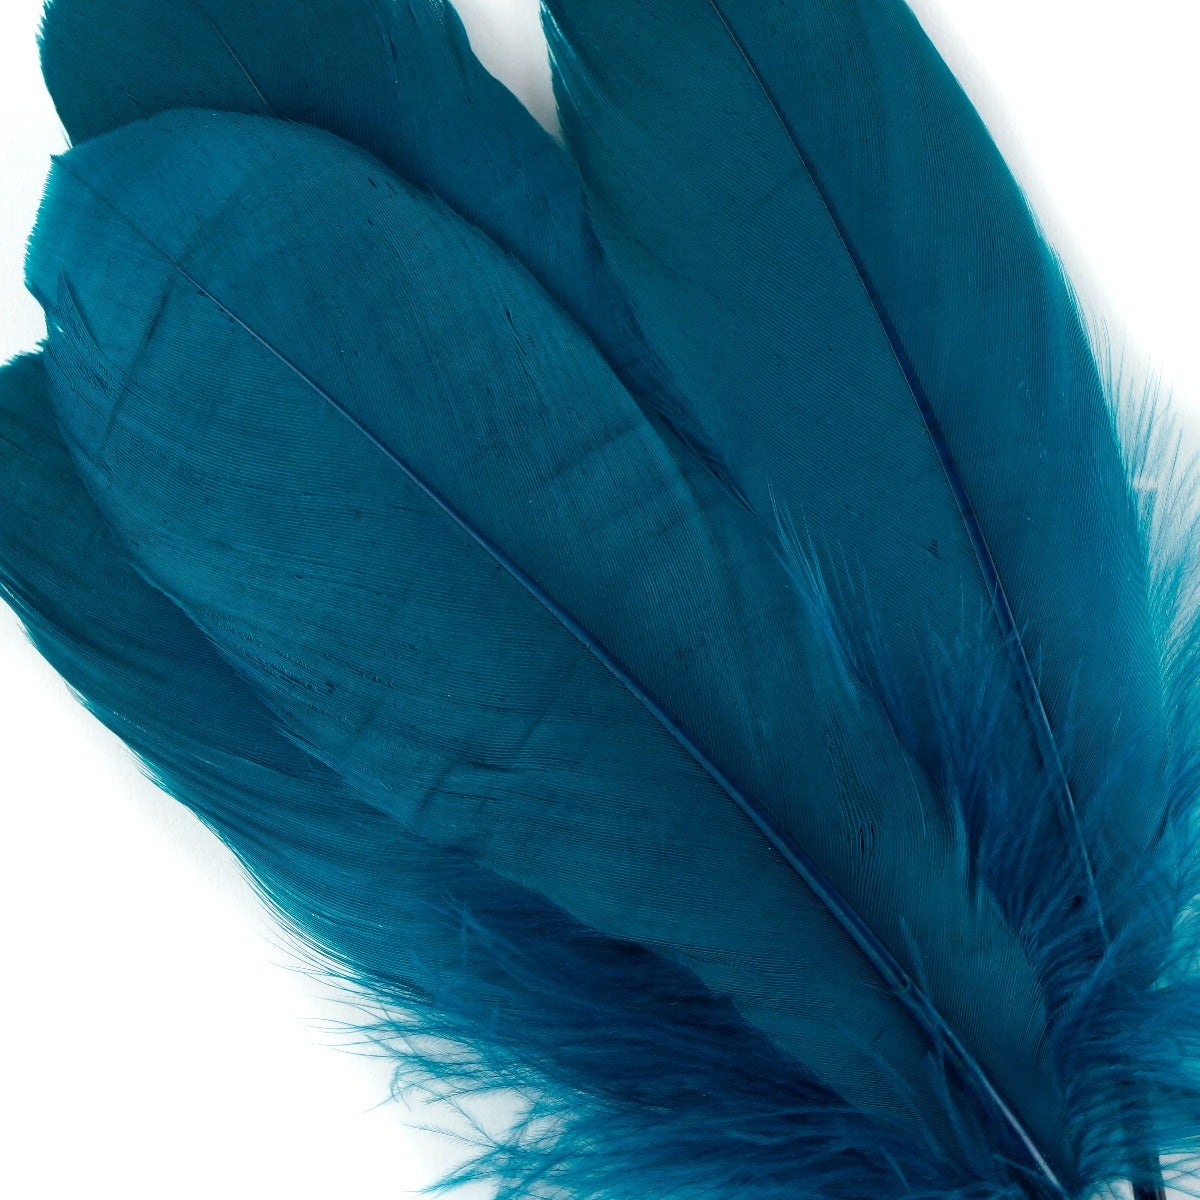 Goose Pallet Feathers 6-8" - 12 pc - Peacock Blue